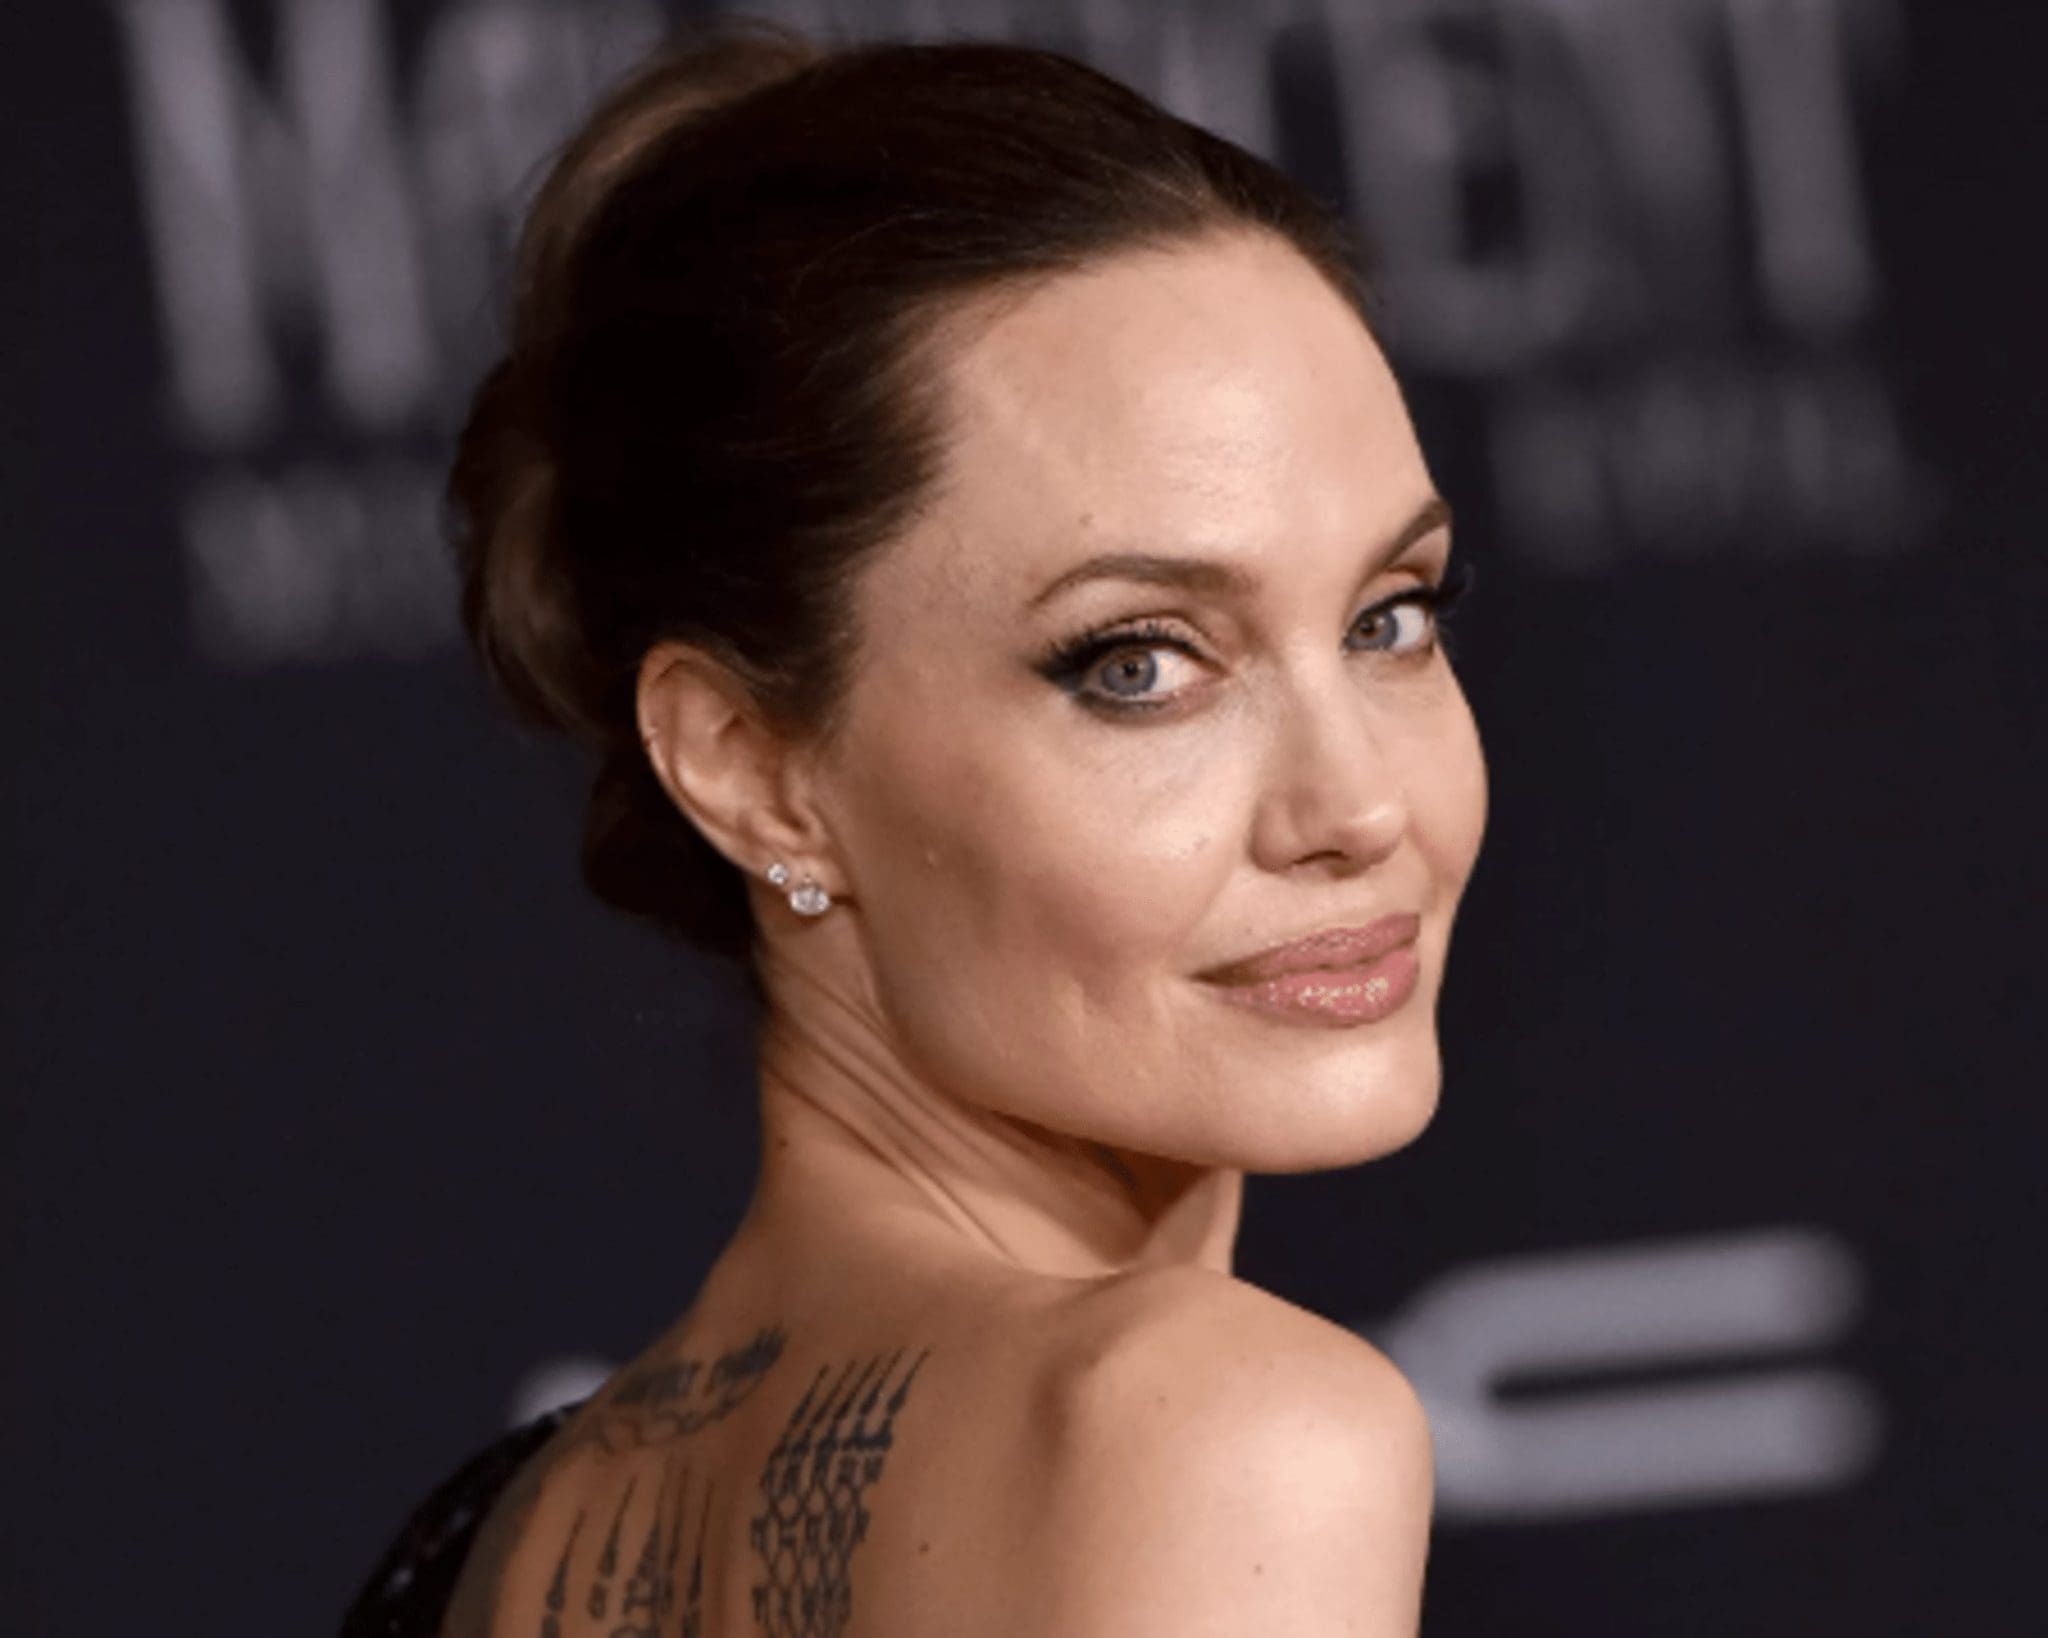 For her next film, Maria, Angelina Jolie has teamed up with Spencer and Jackie director Pablo Larran.